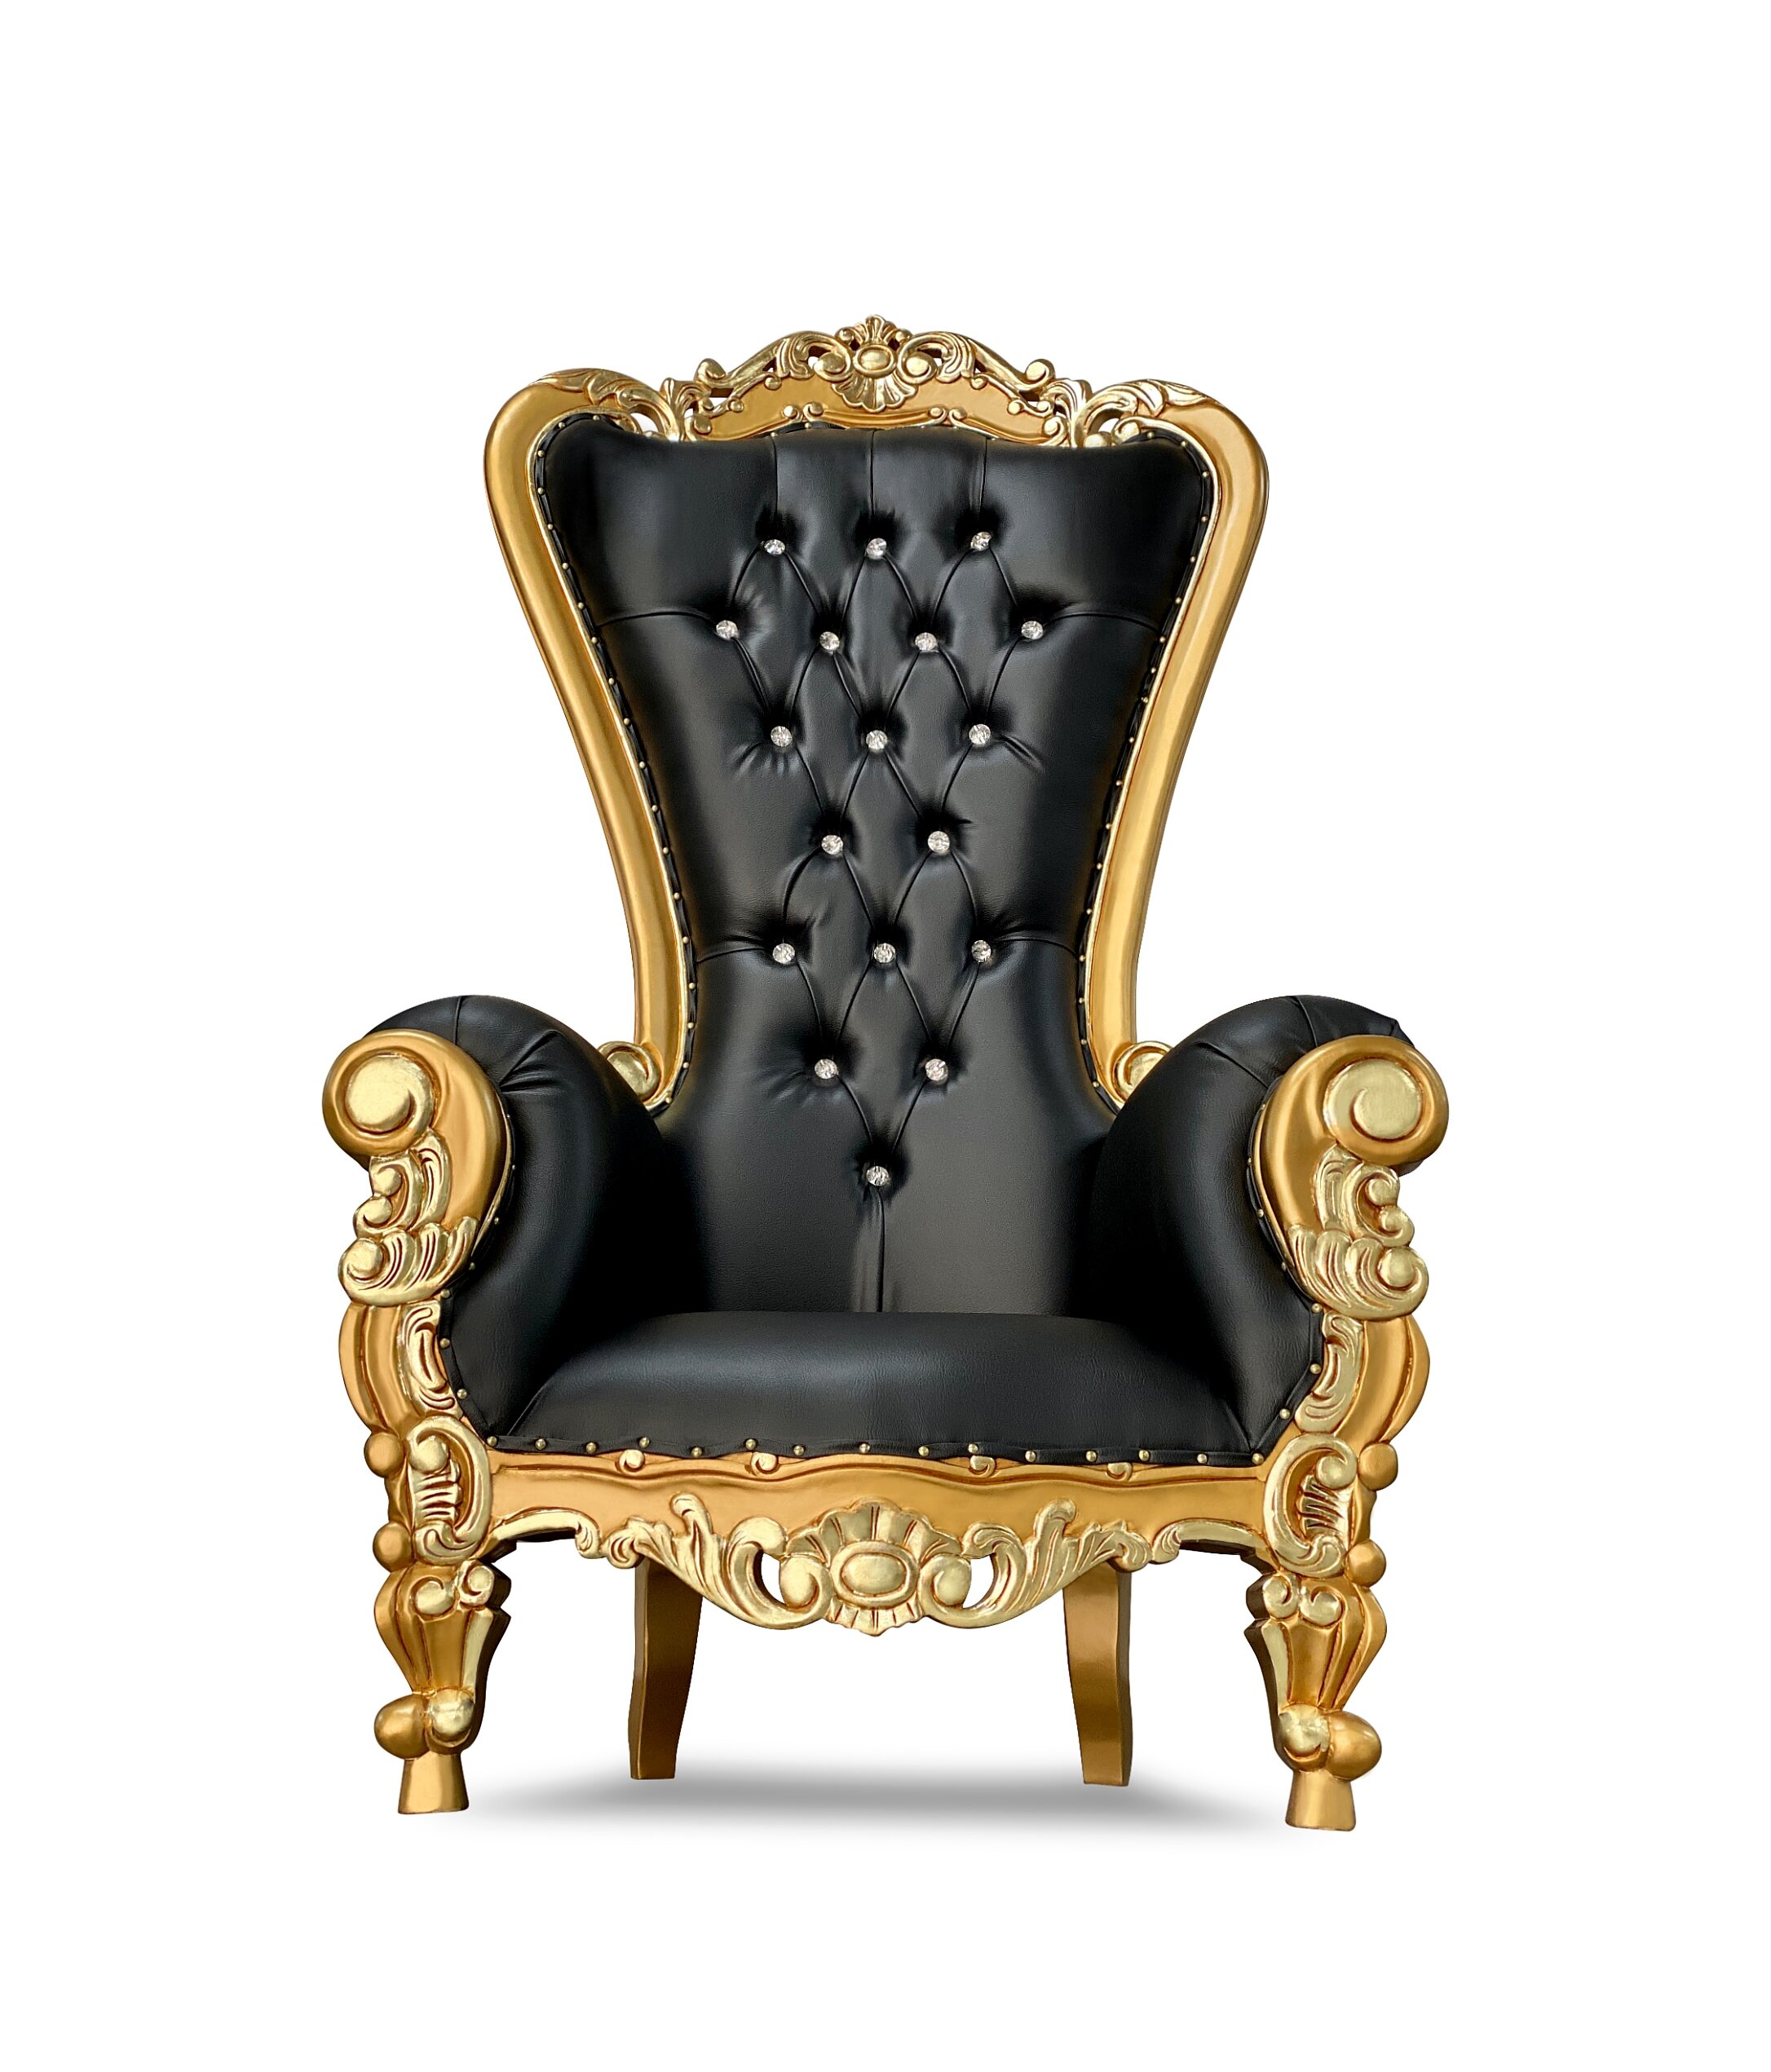 70 Og Throne Chairs Gold Black Chiseled Perfections